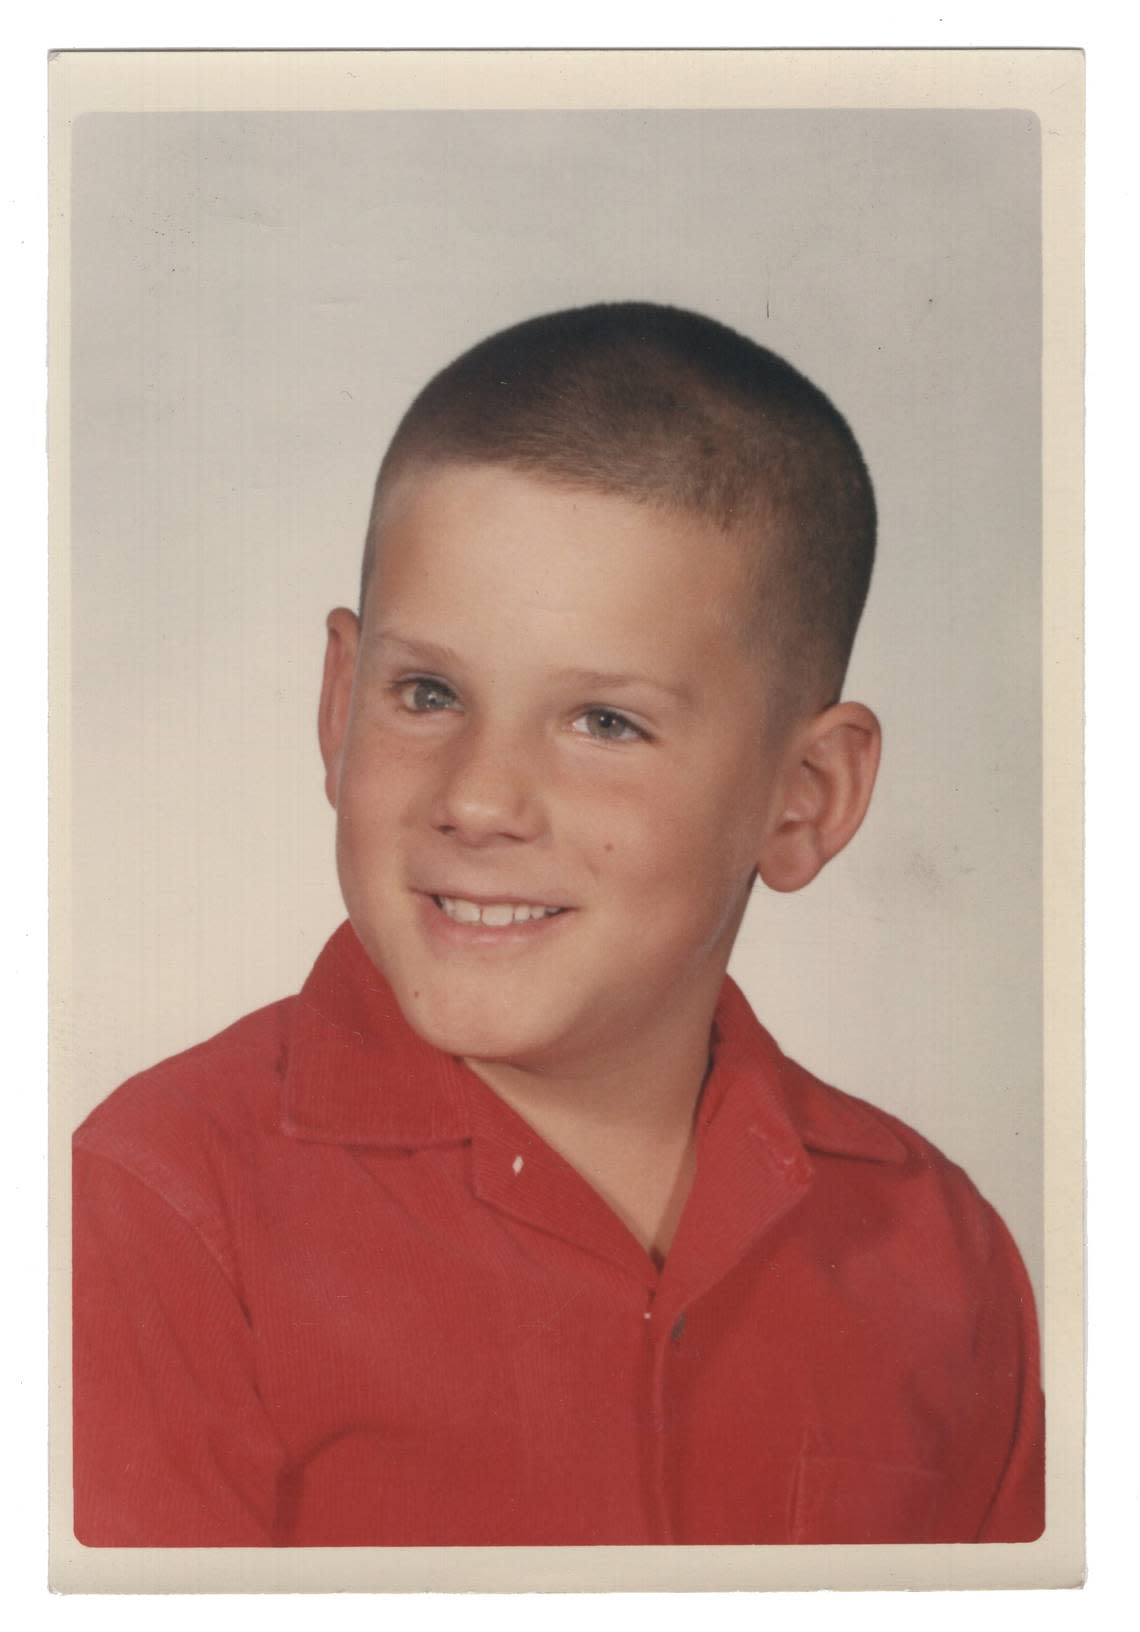 Craig Kletzing’s second-grade school photograph from the fall of 1965. This photograph was sold at Schiff Estate Services on a Del Paso Boulevard in Sacramento in December.